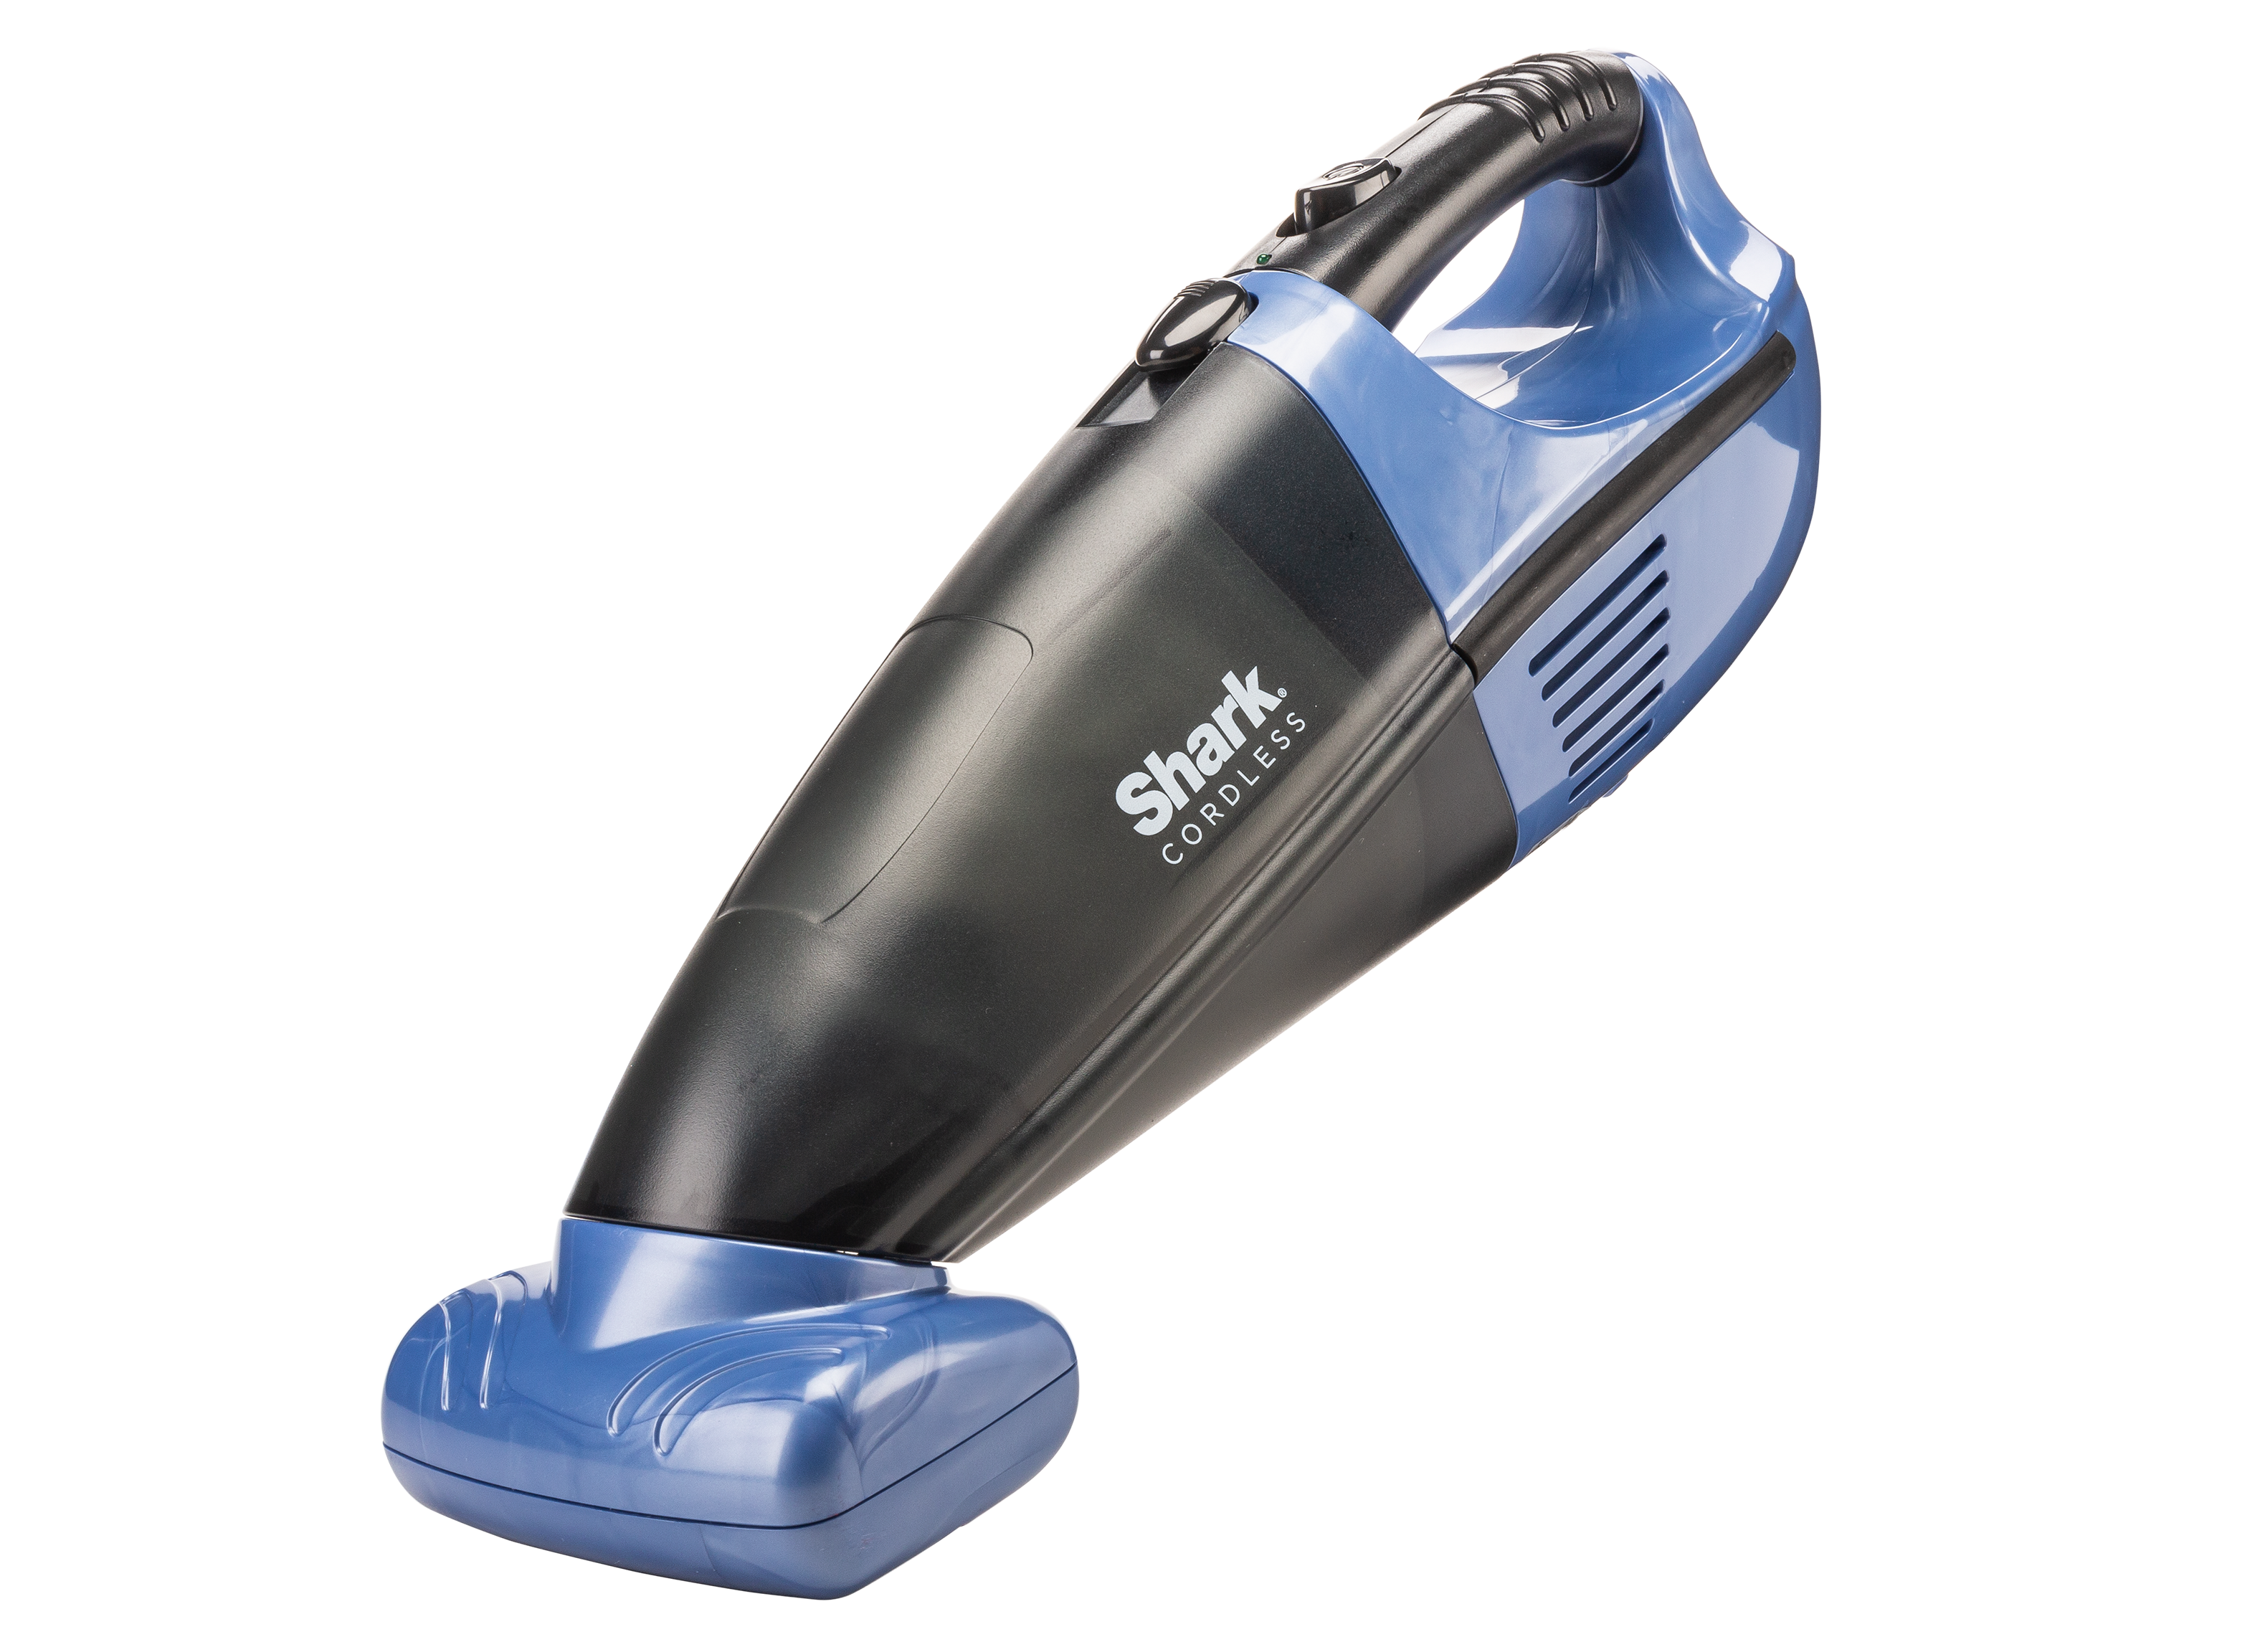 https://crdms.images.consumerreports.org/prod/products/cr/models/403994-handheld-vacuums-shark-pet-perfect-sv75z-10021473.png